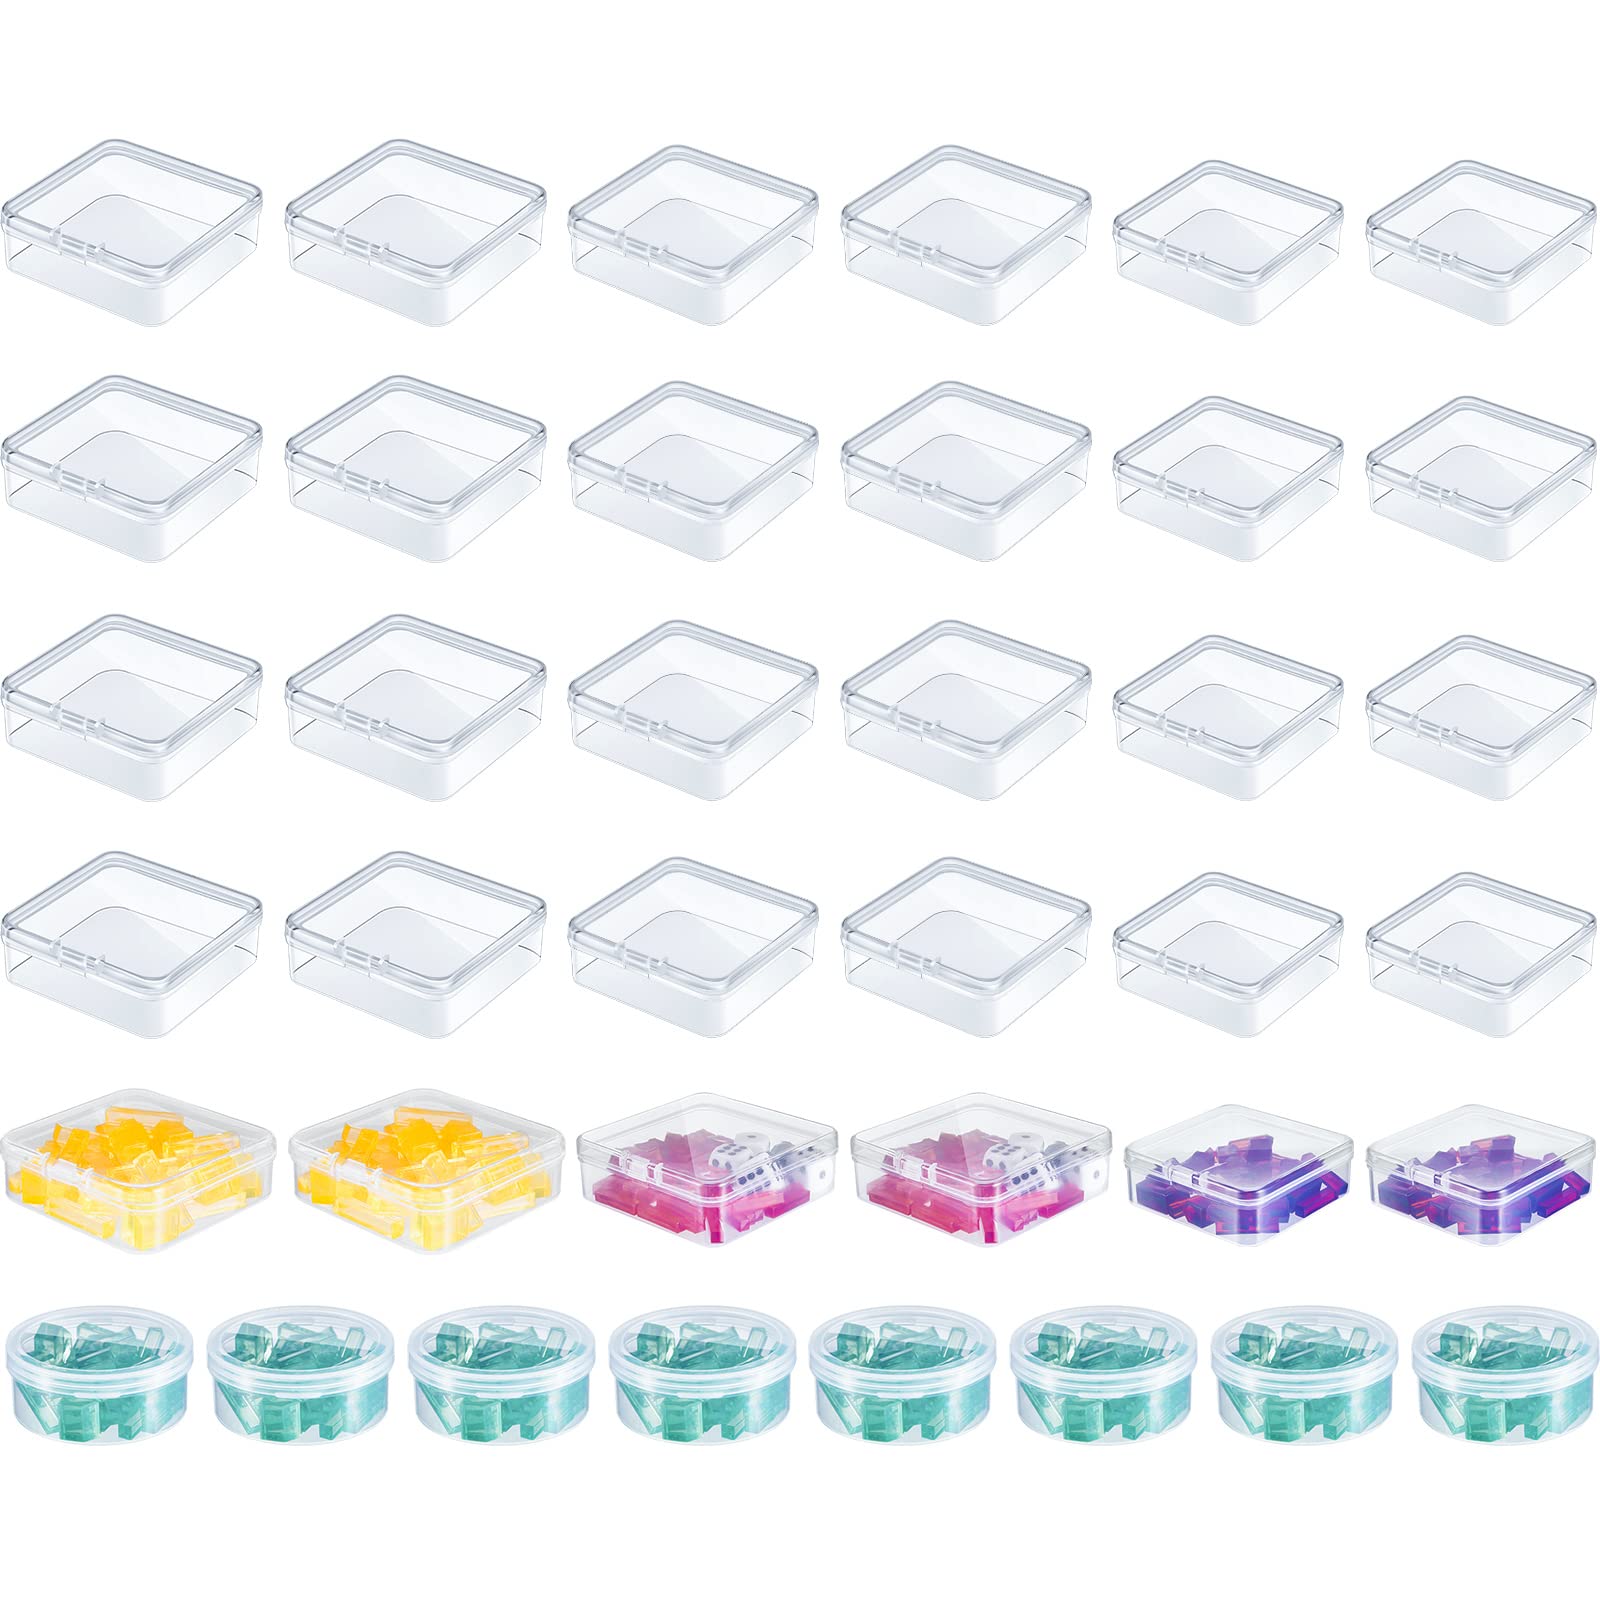 Mua 32 Pcs Mixed Sizes Clear Game Tokens Storage Containers Board Game  Storage Containers Plastic Storage Boxes for Game Components, Empty  Organizer Storage Box with Lids for Game Pieces, Dice, Tokens trên